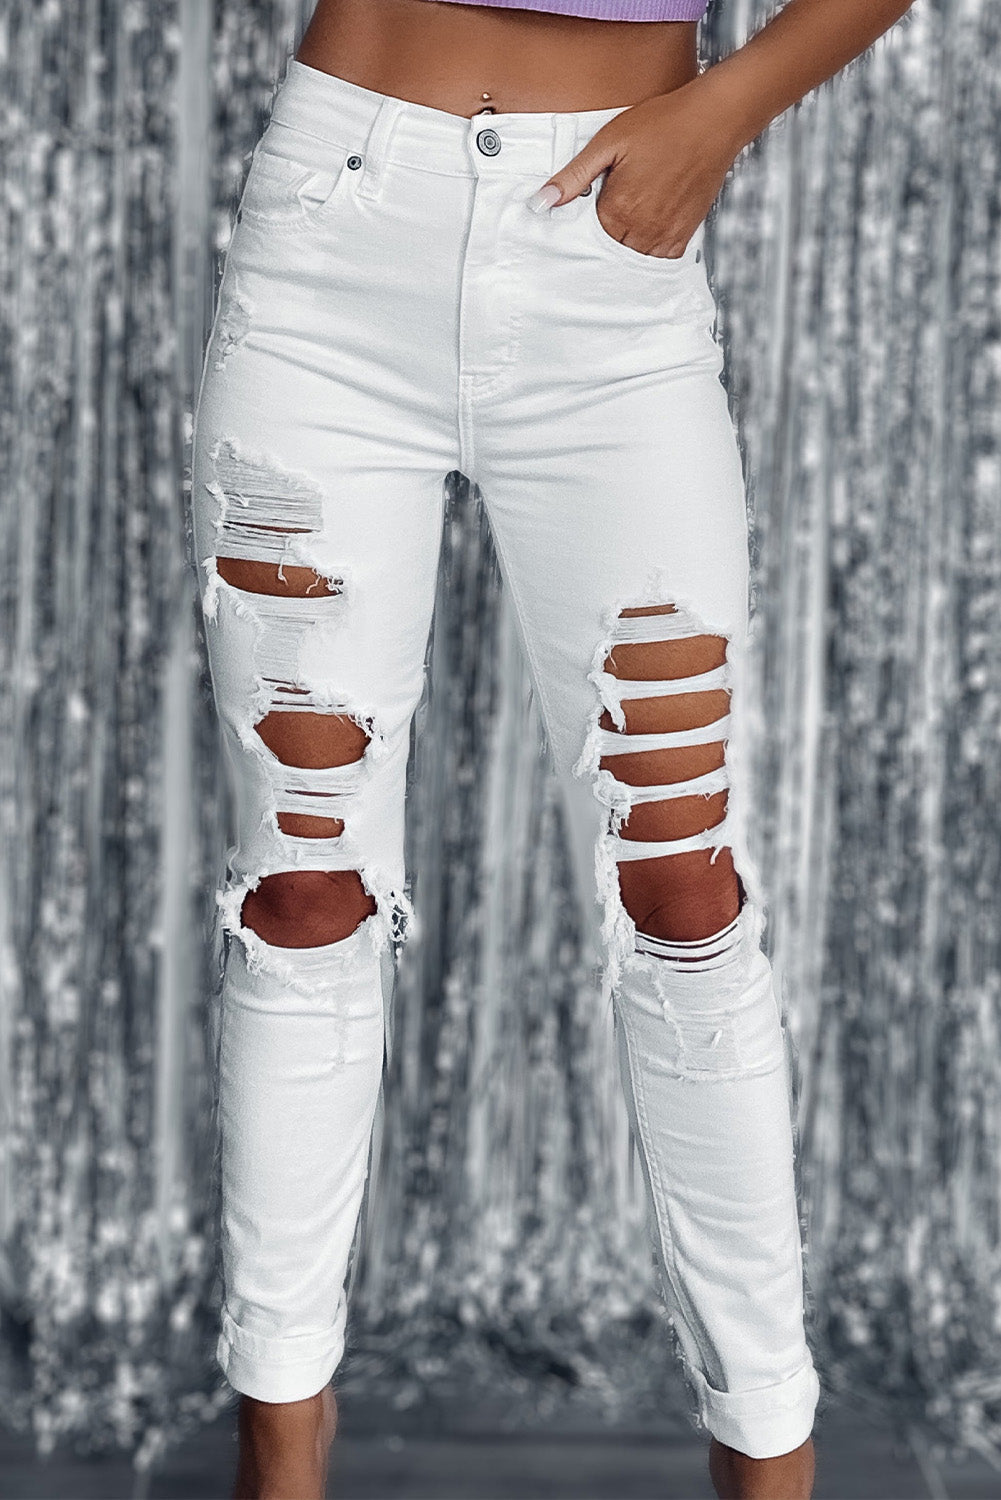 The802Gypsy  Bottoms White / 6 / 95%Cotton+5%Elastane TRAVELING GYPSY-White Distressed High Waist Skinny Jeans